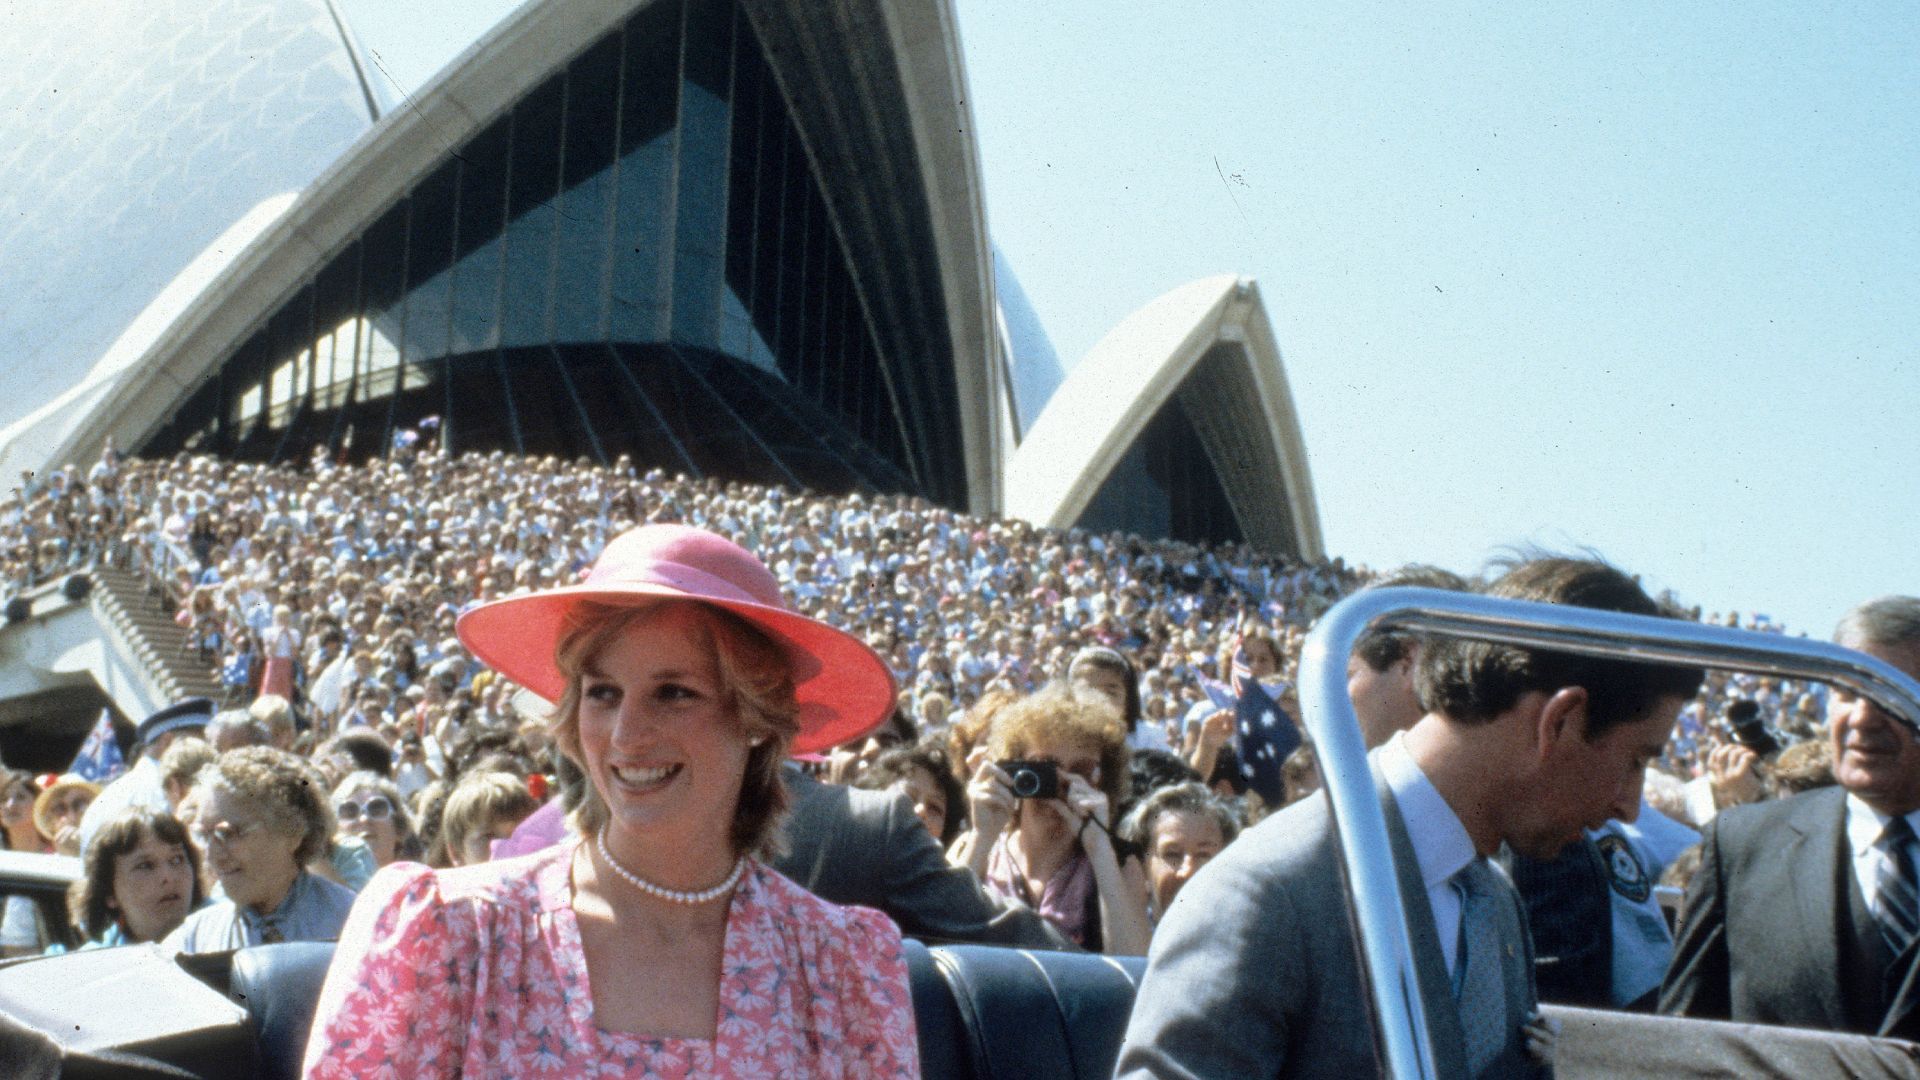 <p>                     At just 22 years old, Australia marked Princess Diana’s first royal tour in 1983 where the royal spent over a month in Australia and New Zealand with the then Prince of Wales and a baby Prince William. While the trip has been cemented in time in Netflix’s <em>The Crown,</em> the iconic tour down under wasn’t all doom and gloom. The young royal loved spending time exploring the wildlife and nature of the country and engaging with crowds who were enthralled by the fashionable princess. It was this tour that really highlighted Diana’s popularity, overshadowing the future king and thrusting her into the spotlight even more.                   </p>